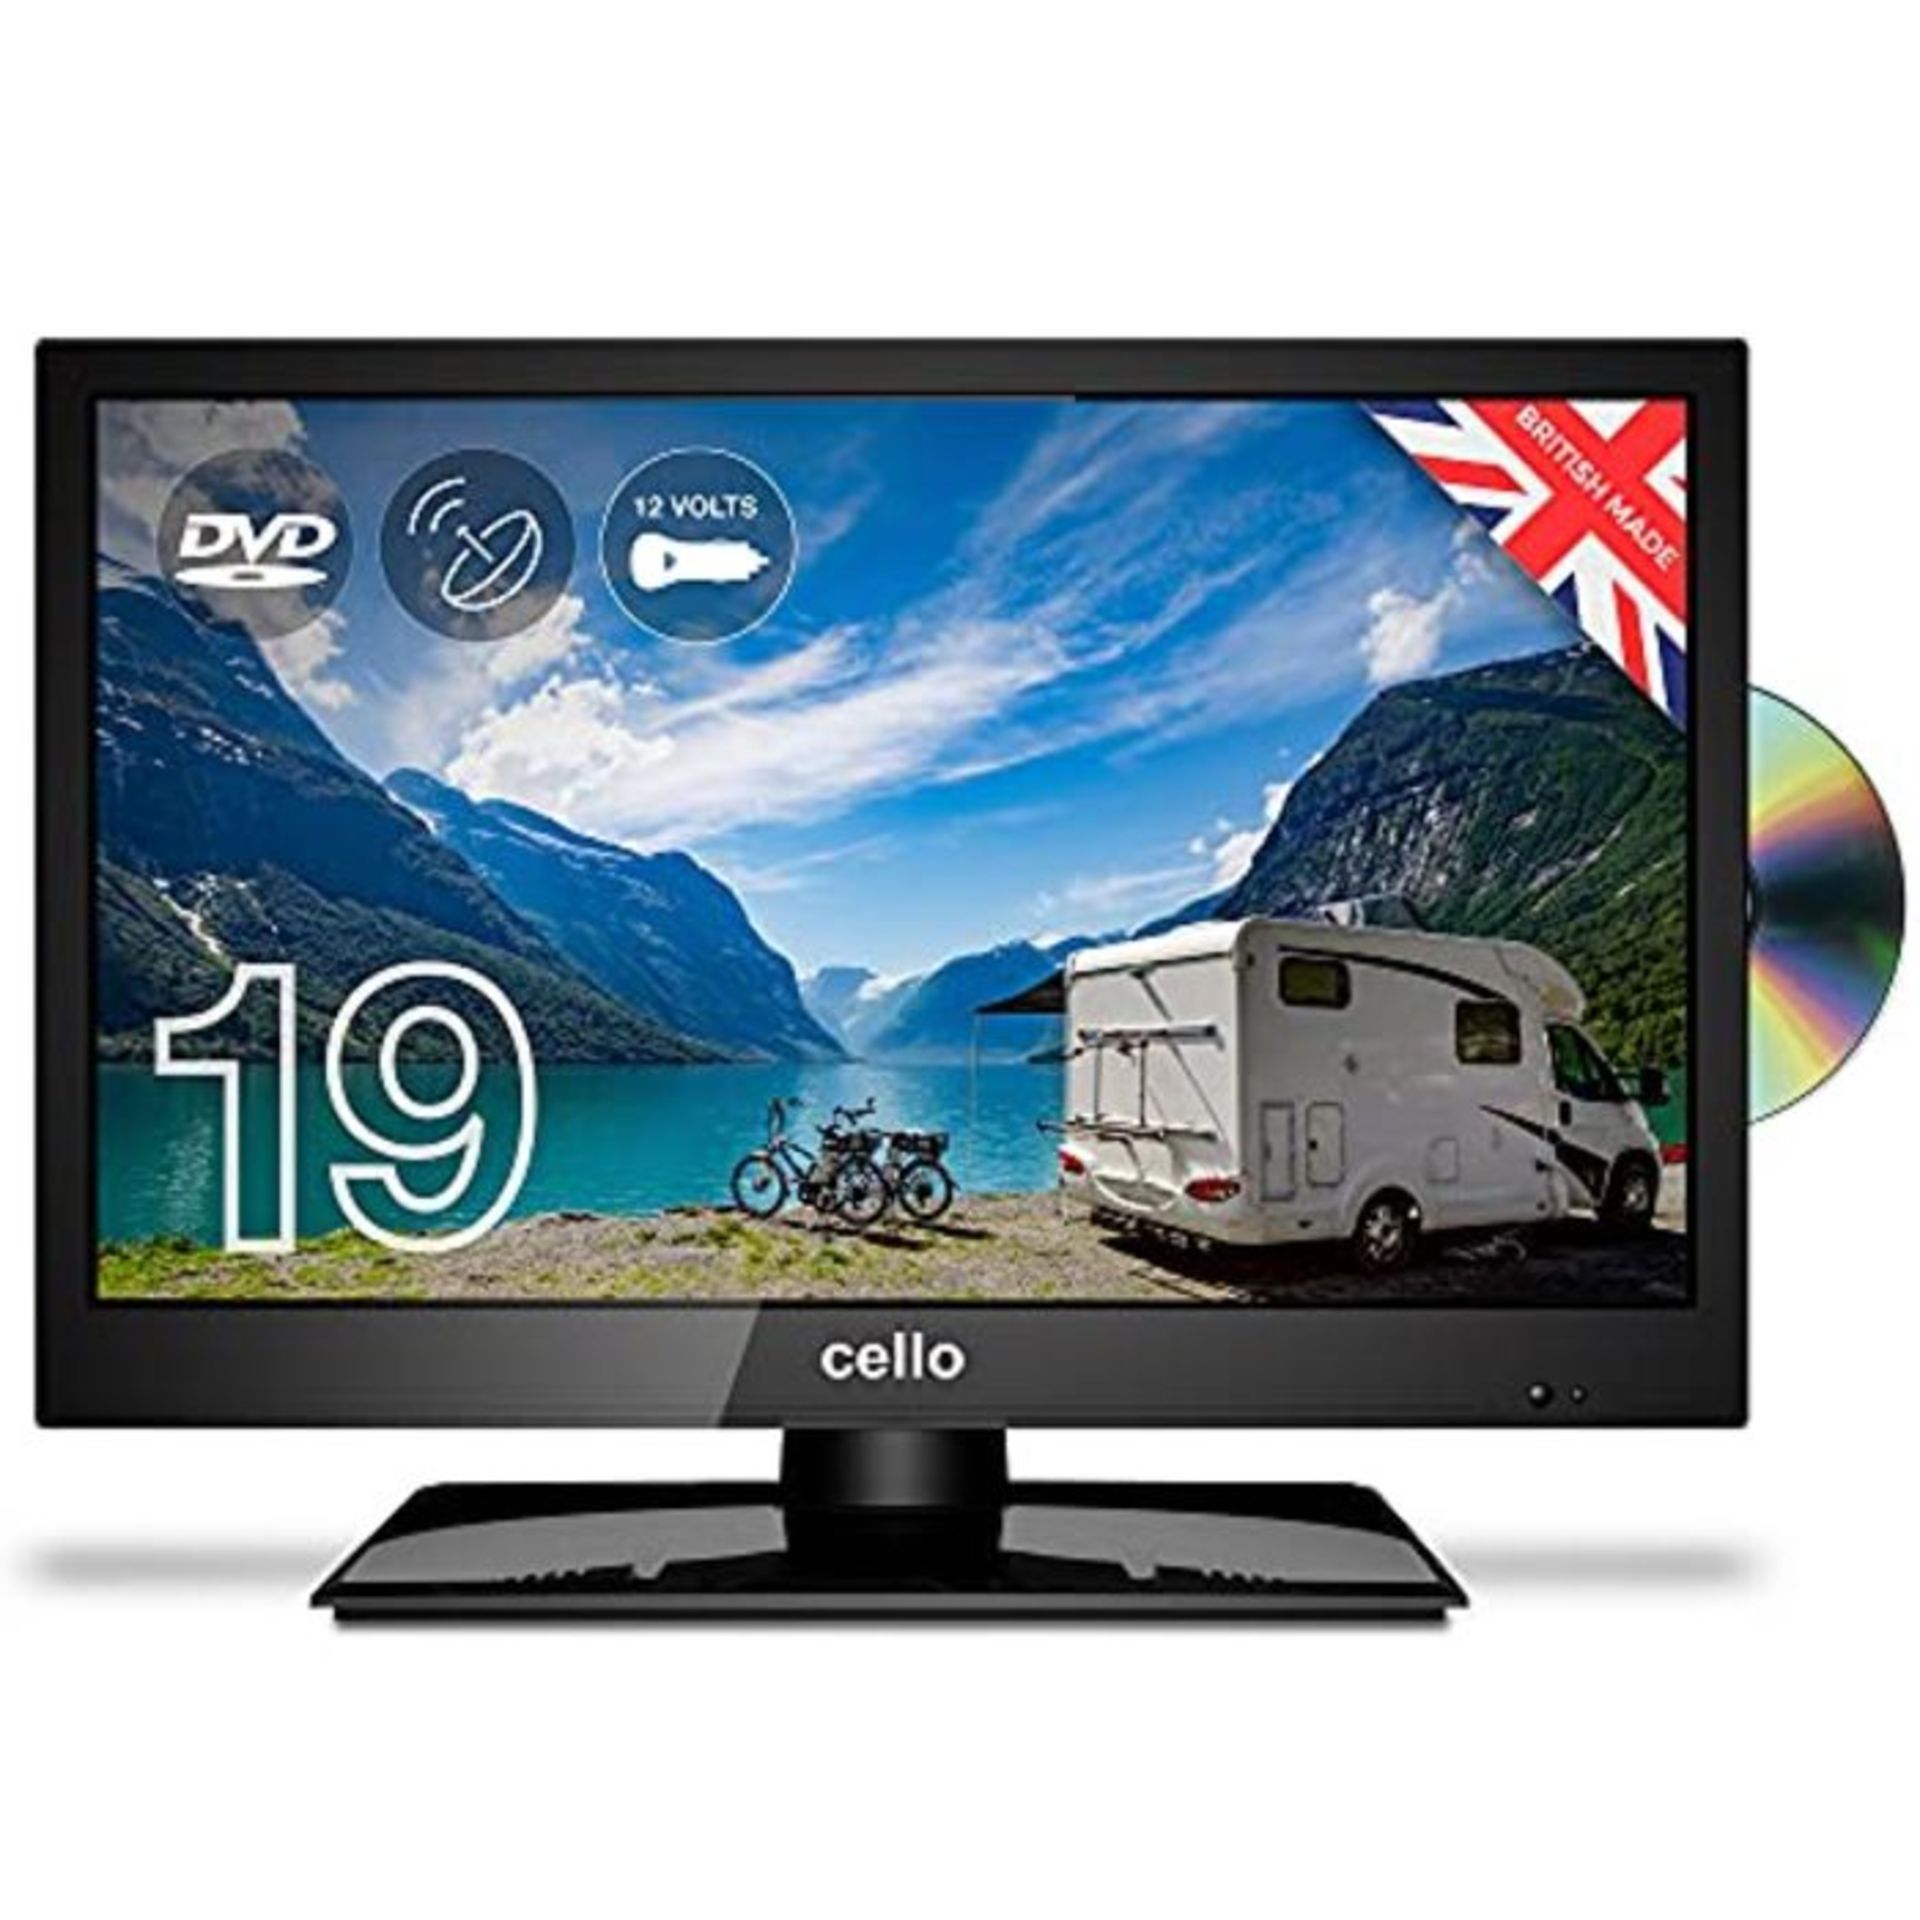 RRP £189.00 Cello ZSF0291 12 volt 19" inch LED TV/DVD Freeview HD with Satellite Receiver | 2020 M